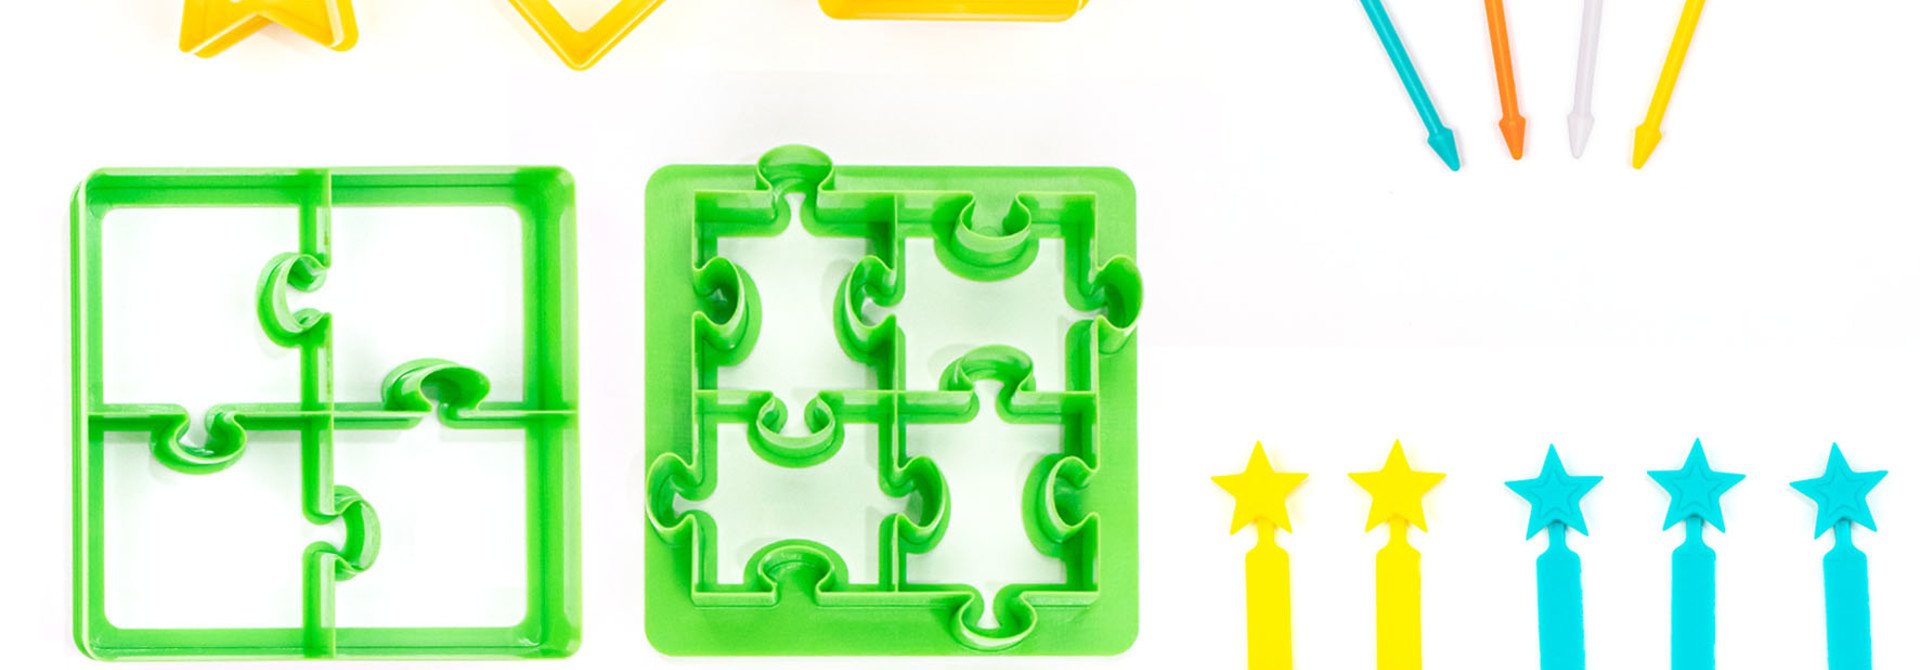 Lunch Punch Cutter & Bento Set- Dino - Puzzel